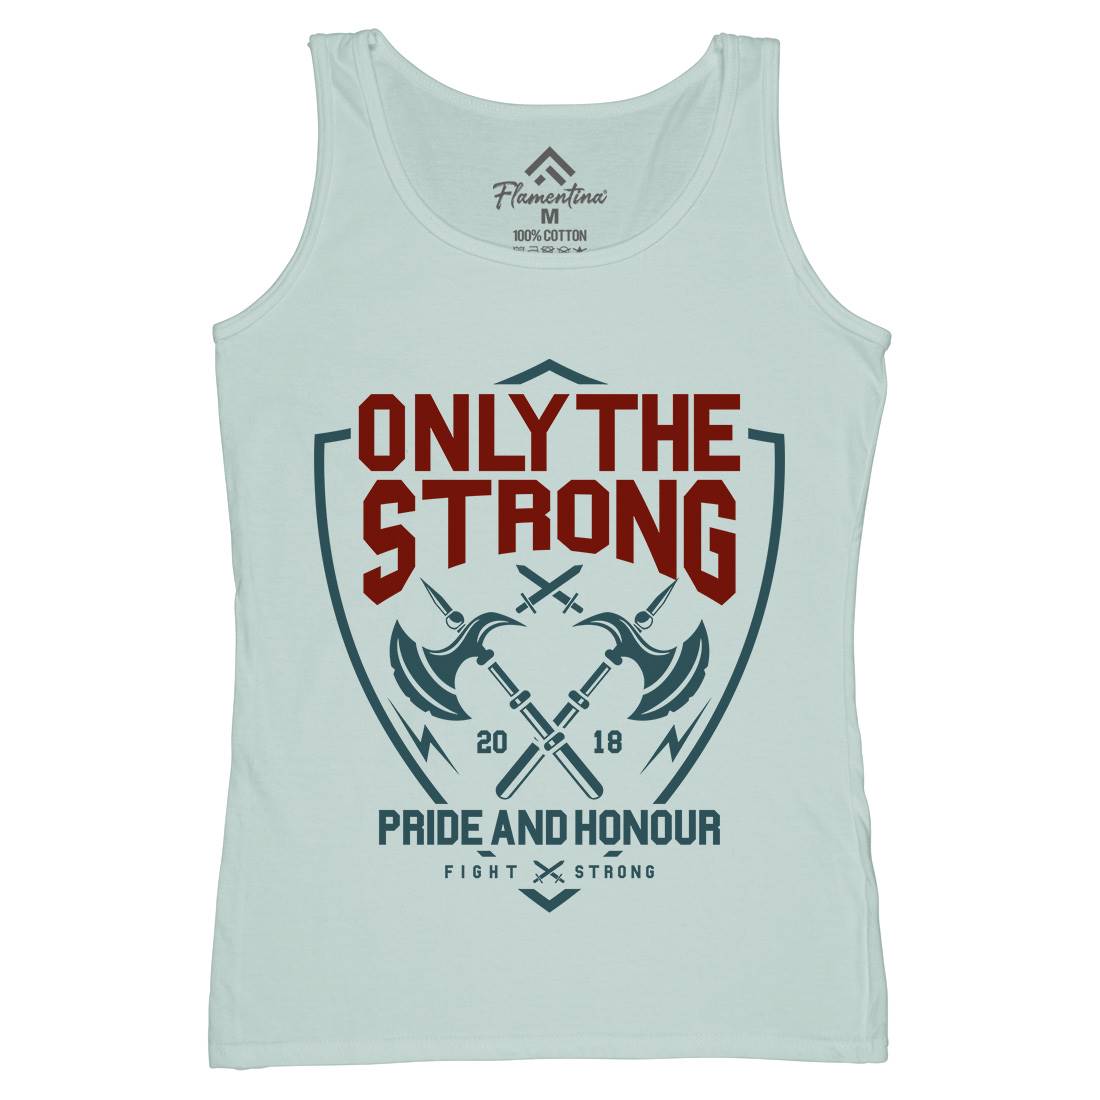 Only The Strong Womens Organic Tank Top Vest Quotes A257